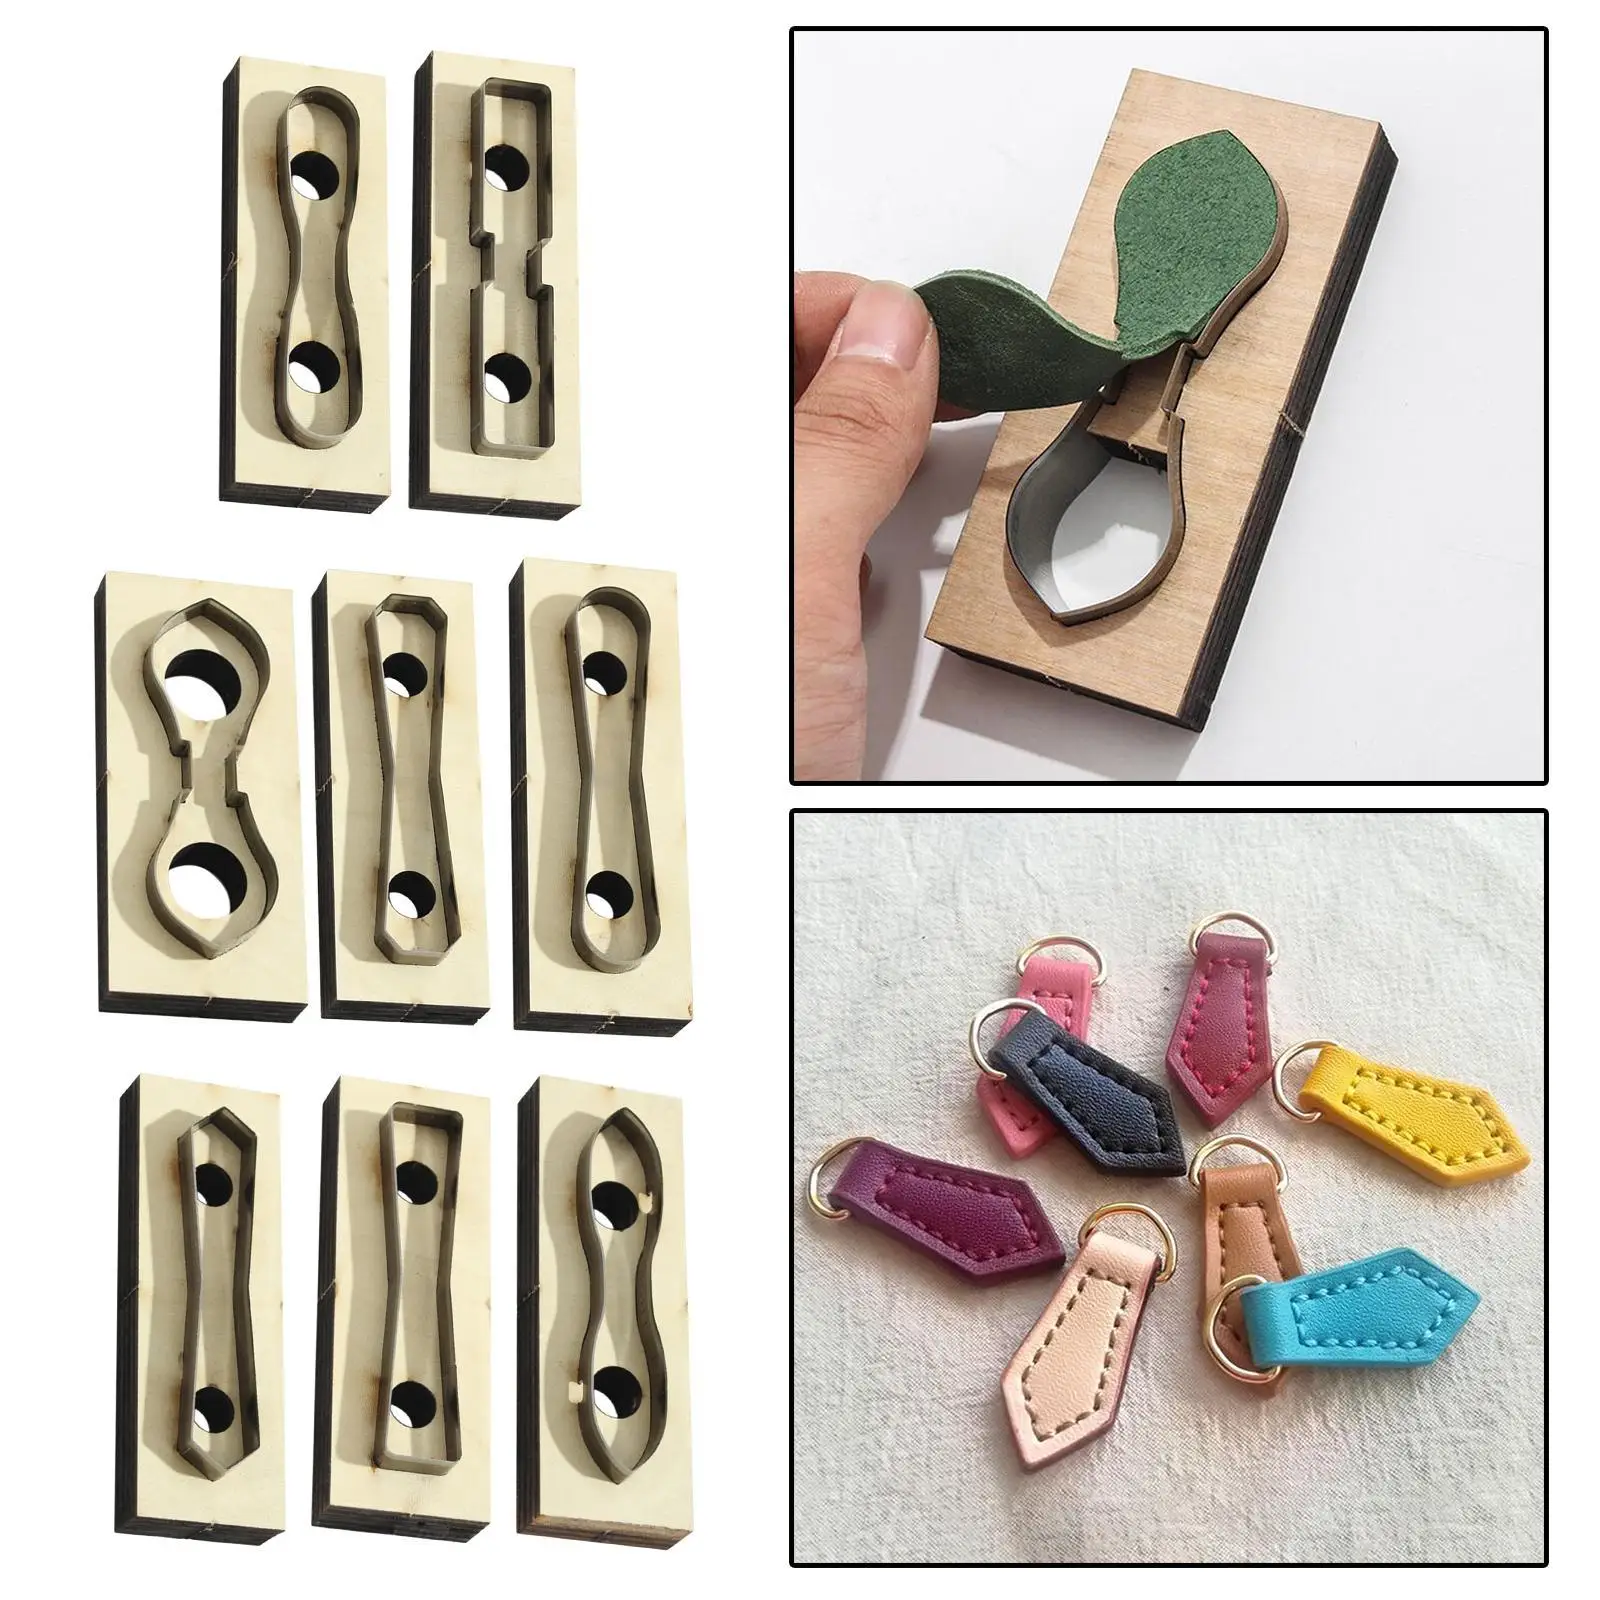 Leather Cutting Die Strip Scrapbook Embossing,Cutter Leather Mold for Crafts Jewelry Making,Home Decorations